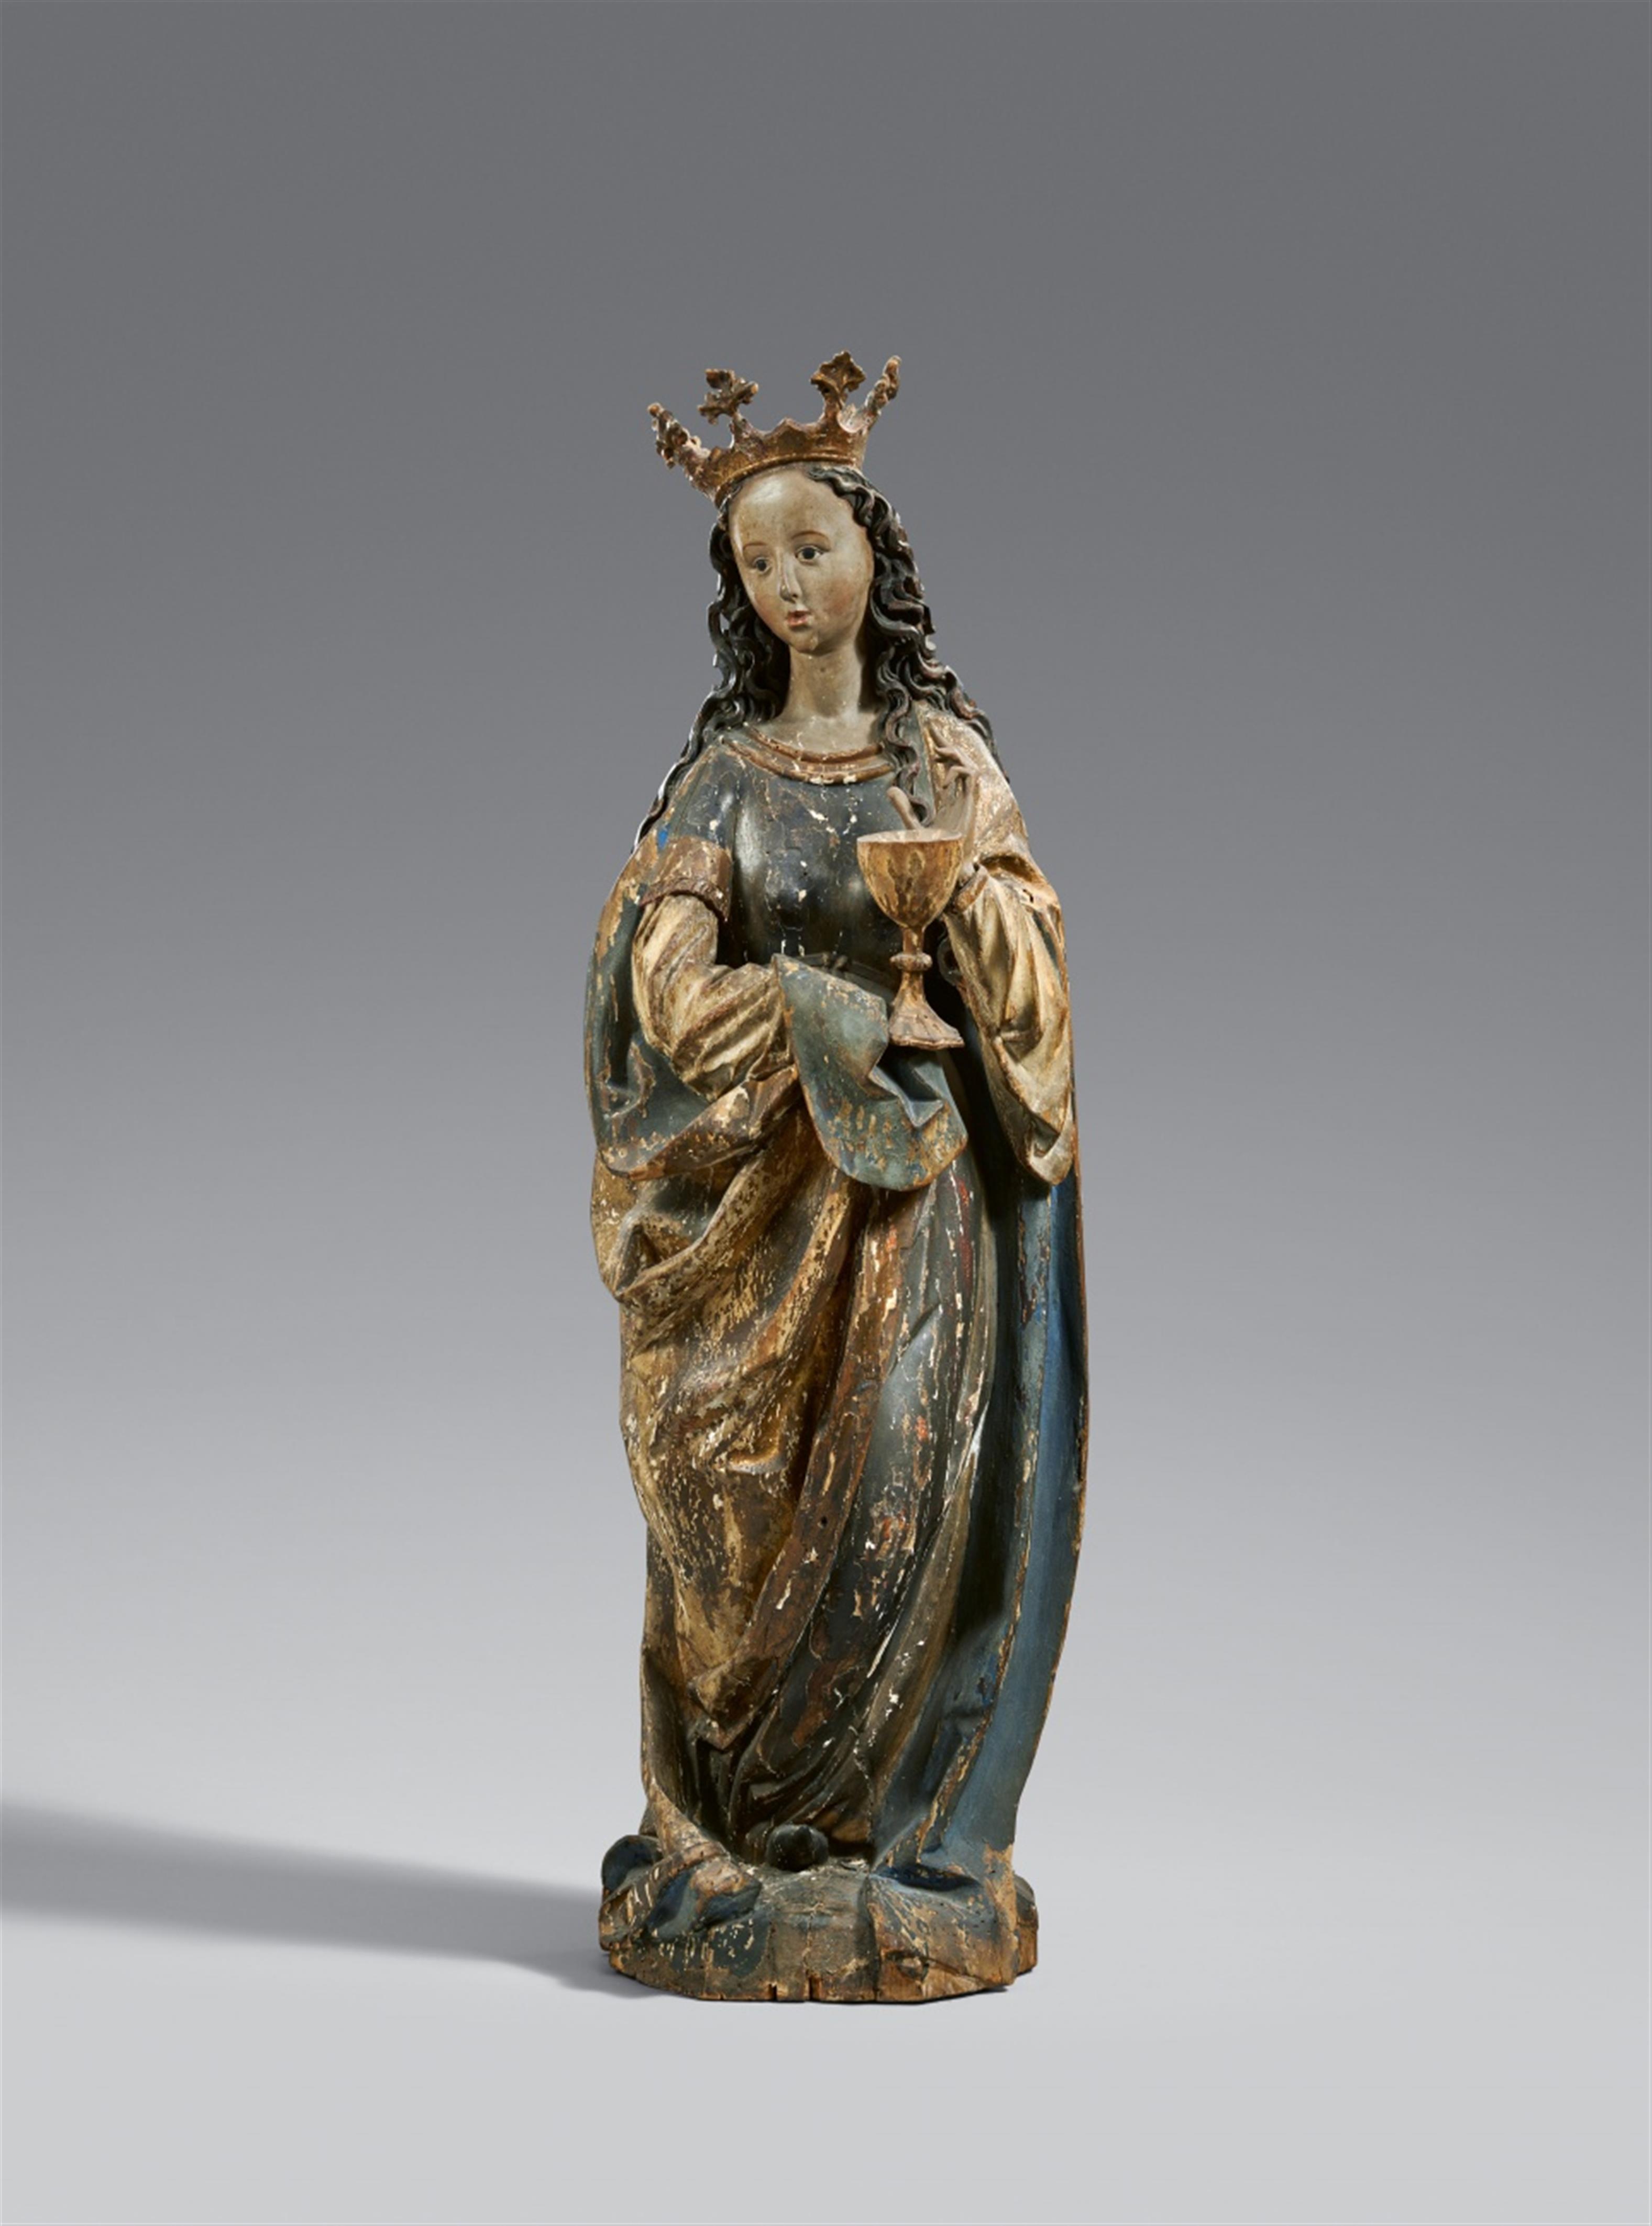 Franconia early 16th century - An early 16th century Franconian carved wood figure of Saint Barbara - image-1